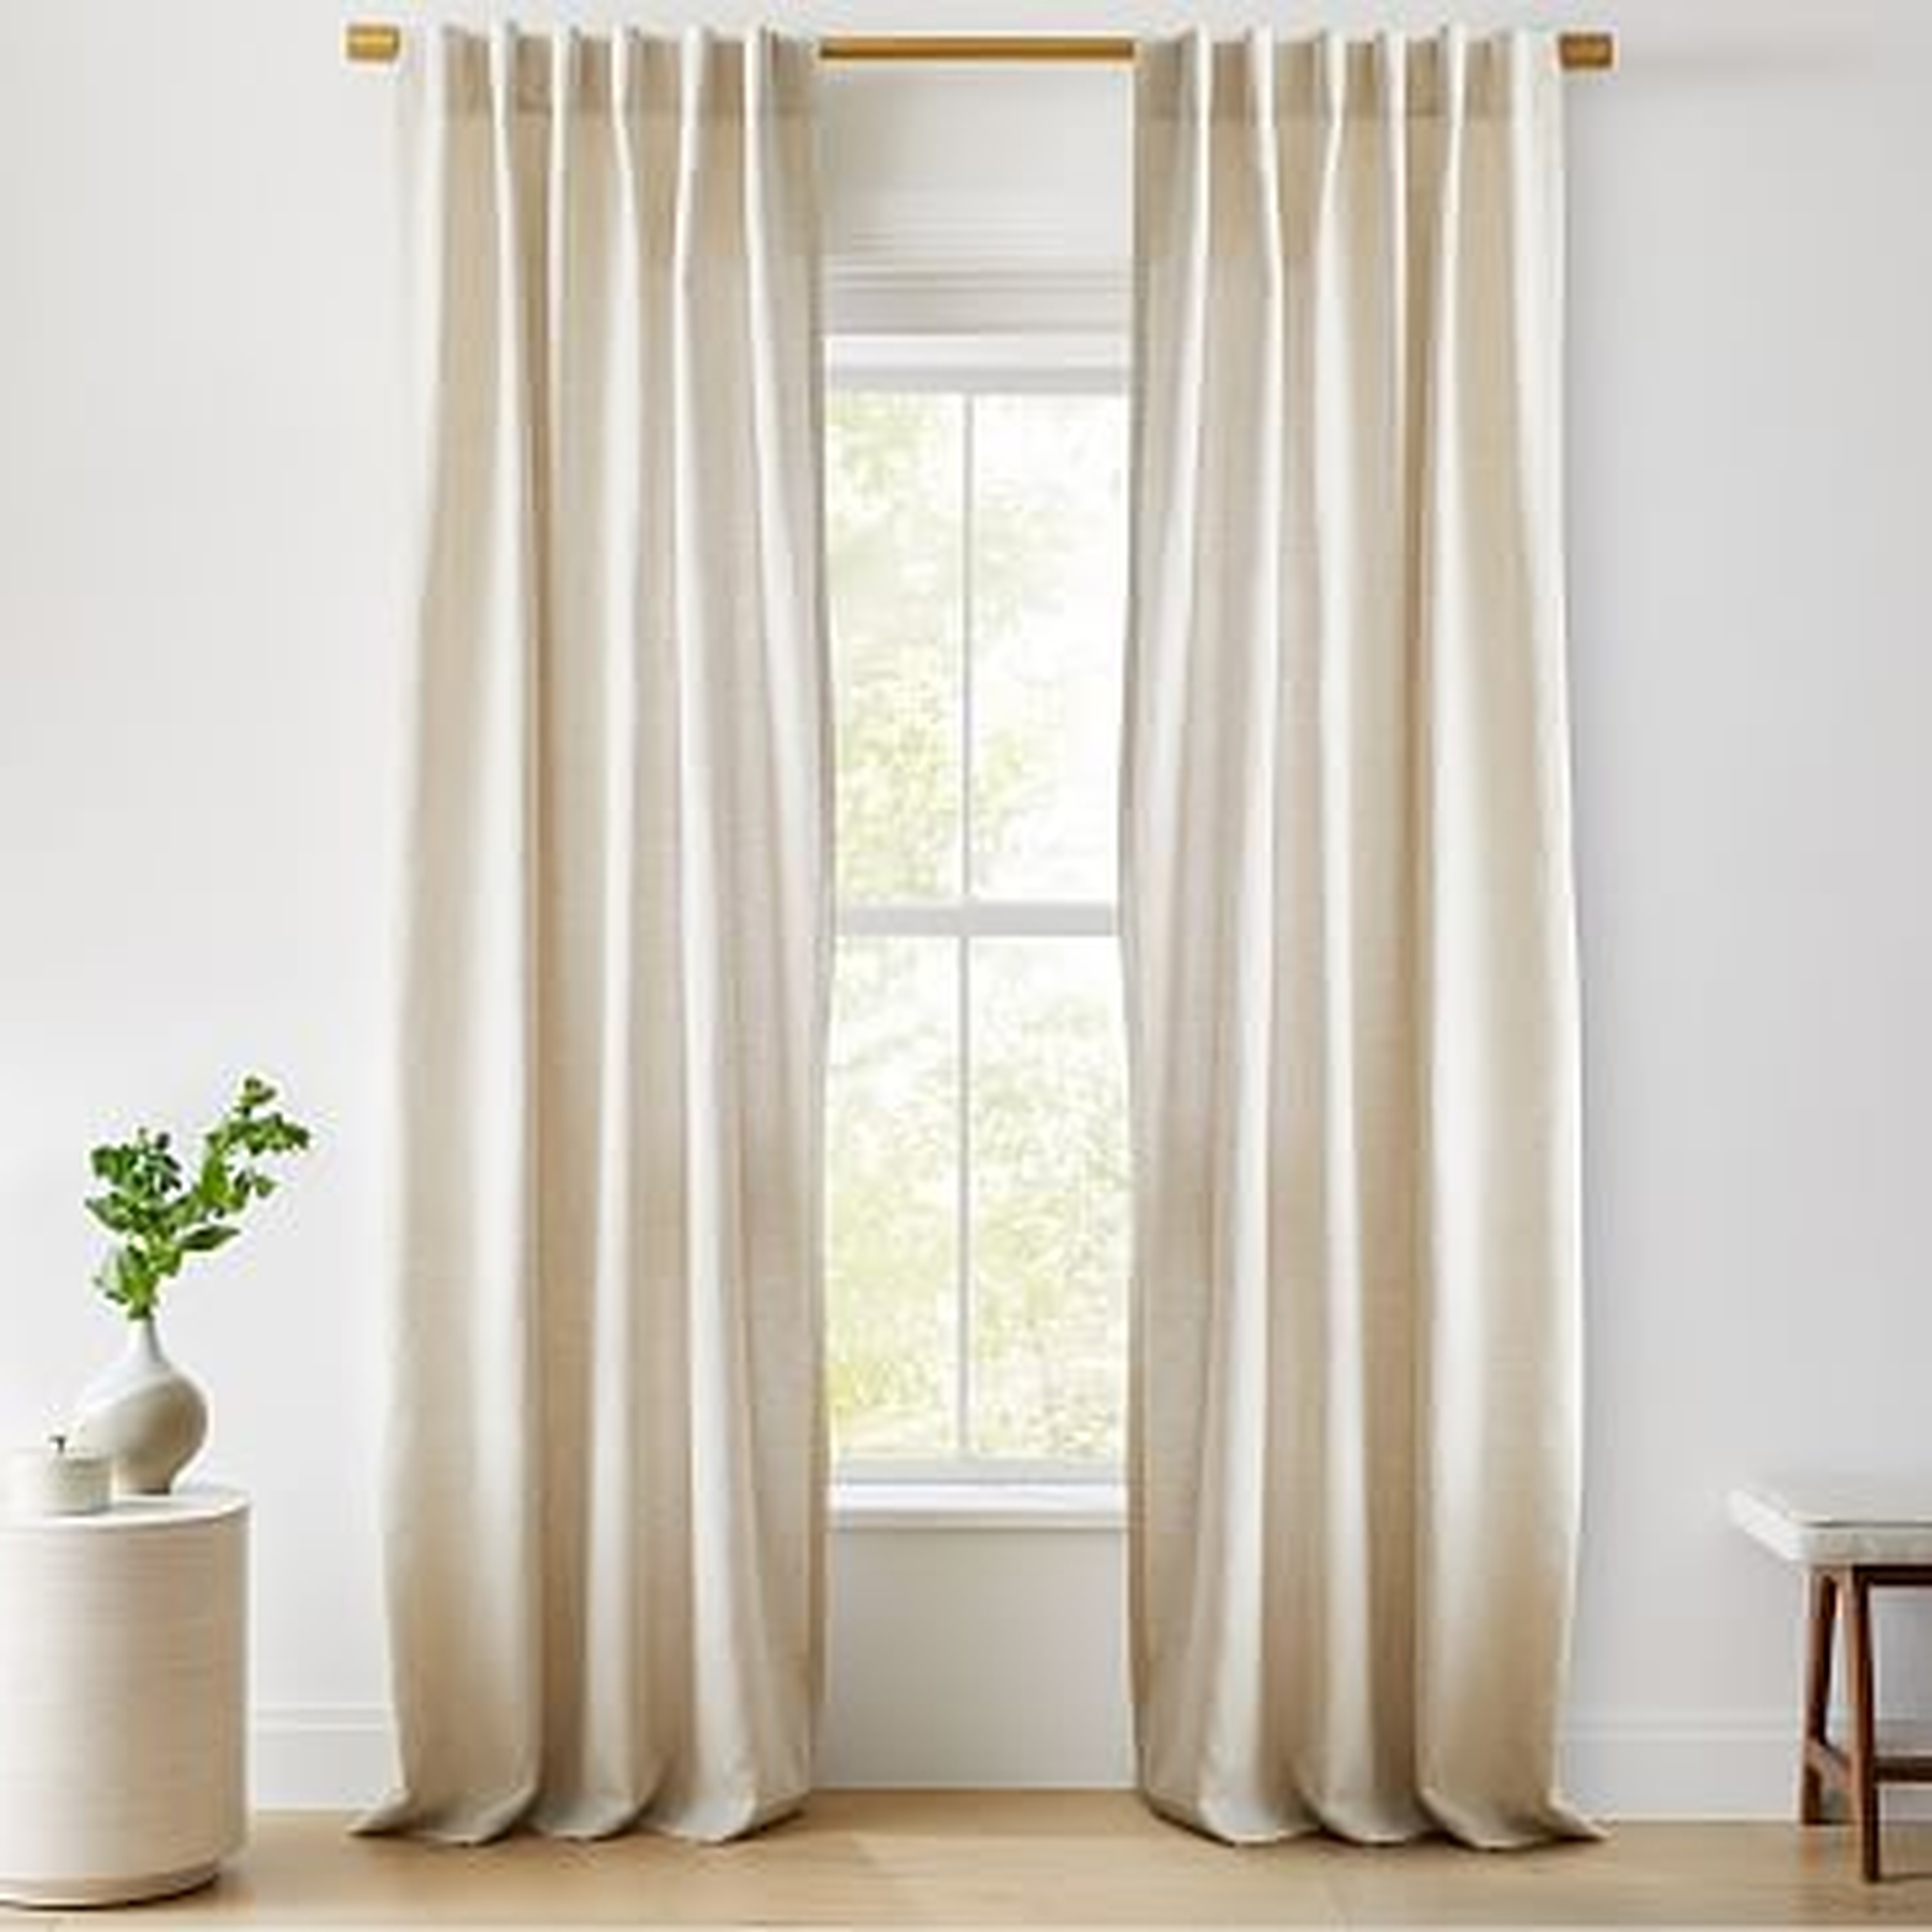 Custom Size Solid European Flax Linen Curtain with Cotton Lining, Natural, 54"x96" - West Elm